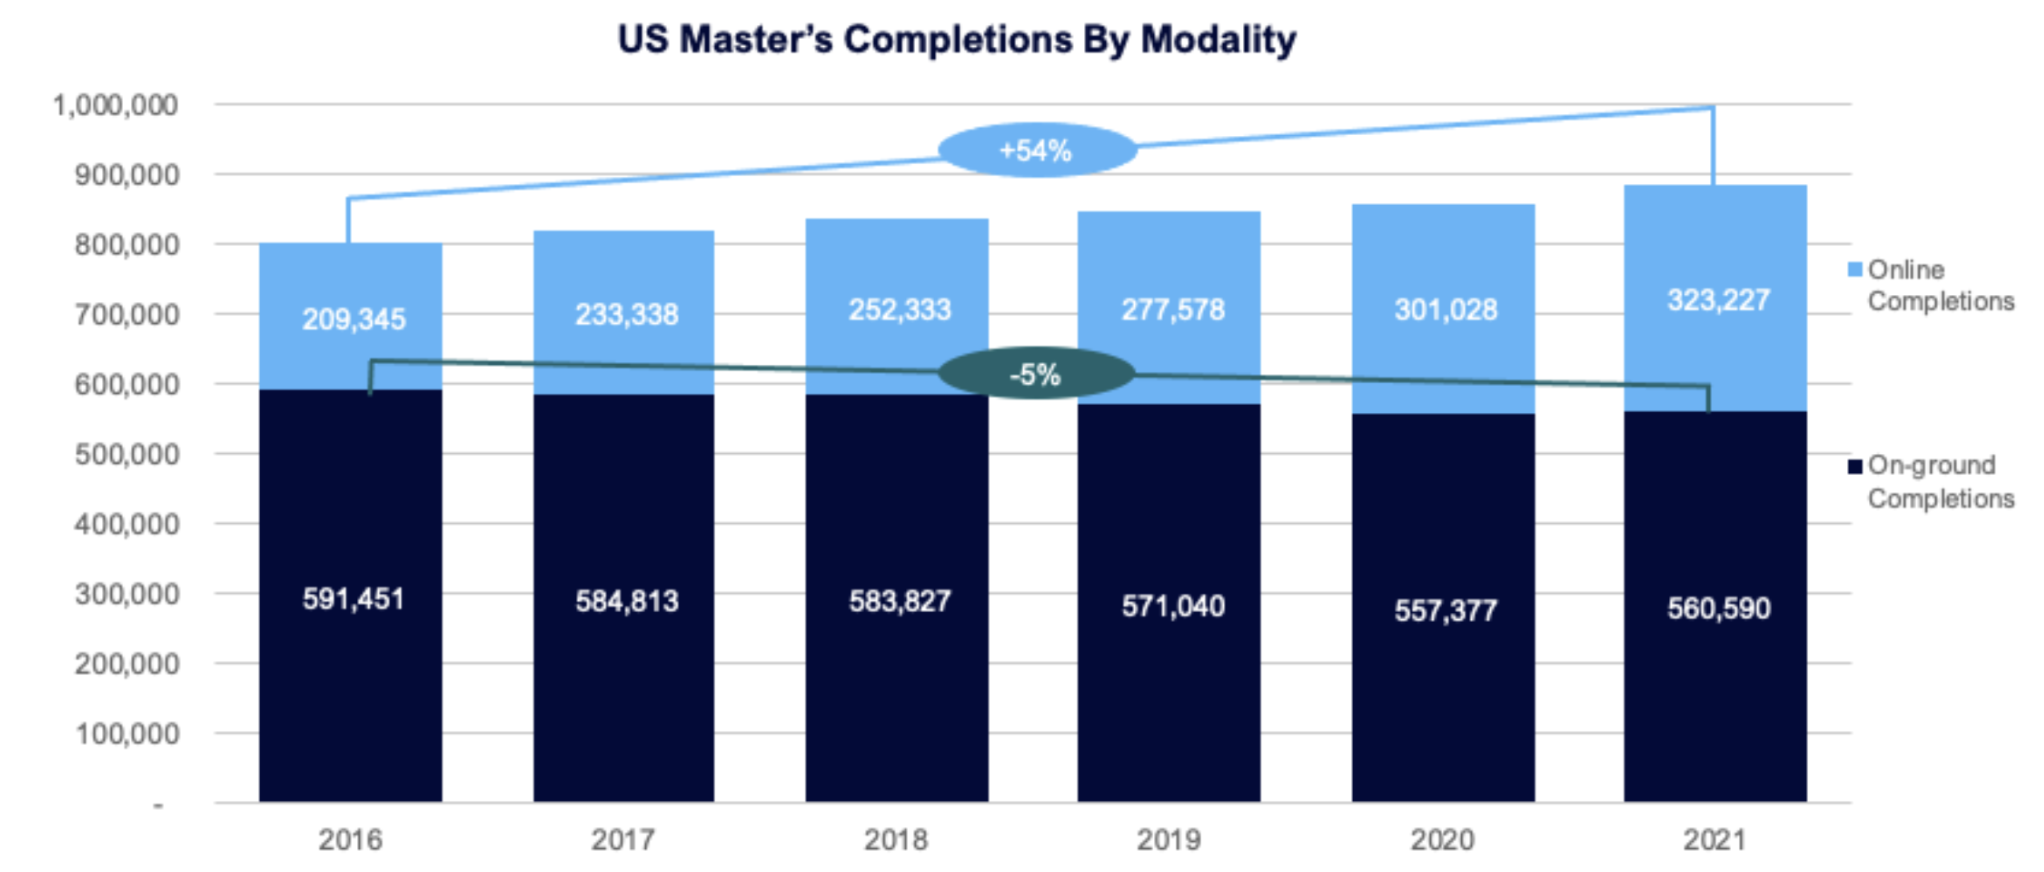 US Master's Completions by Modality